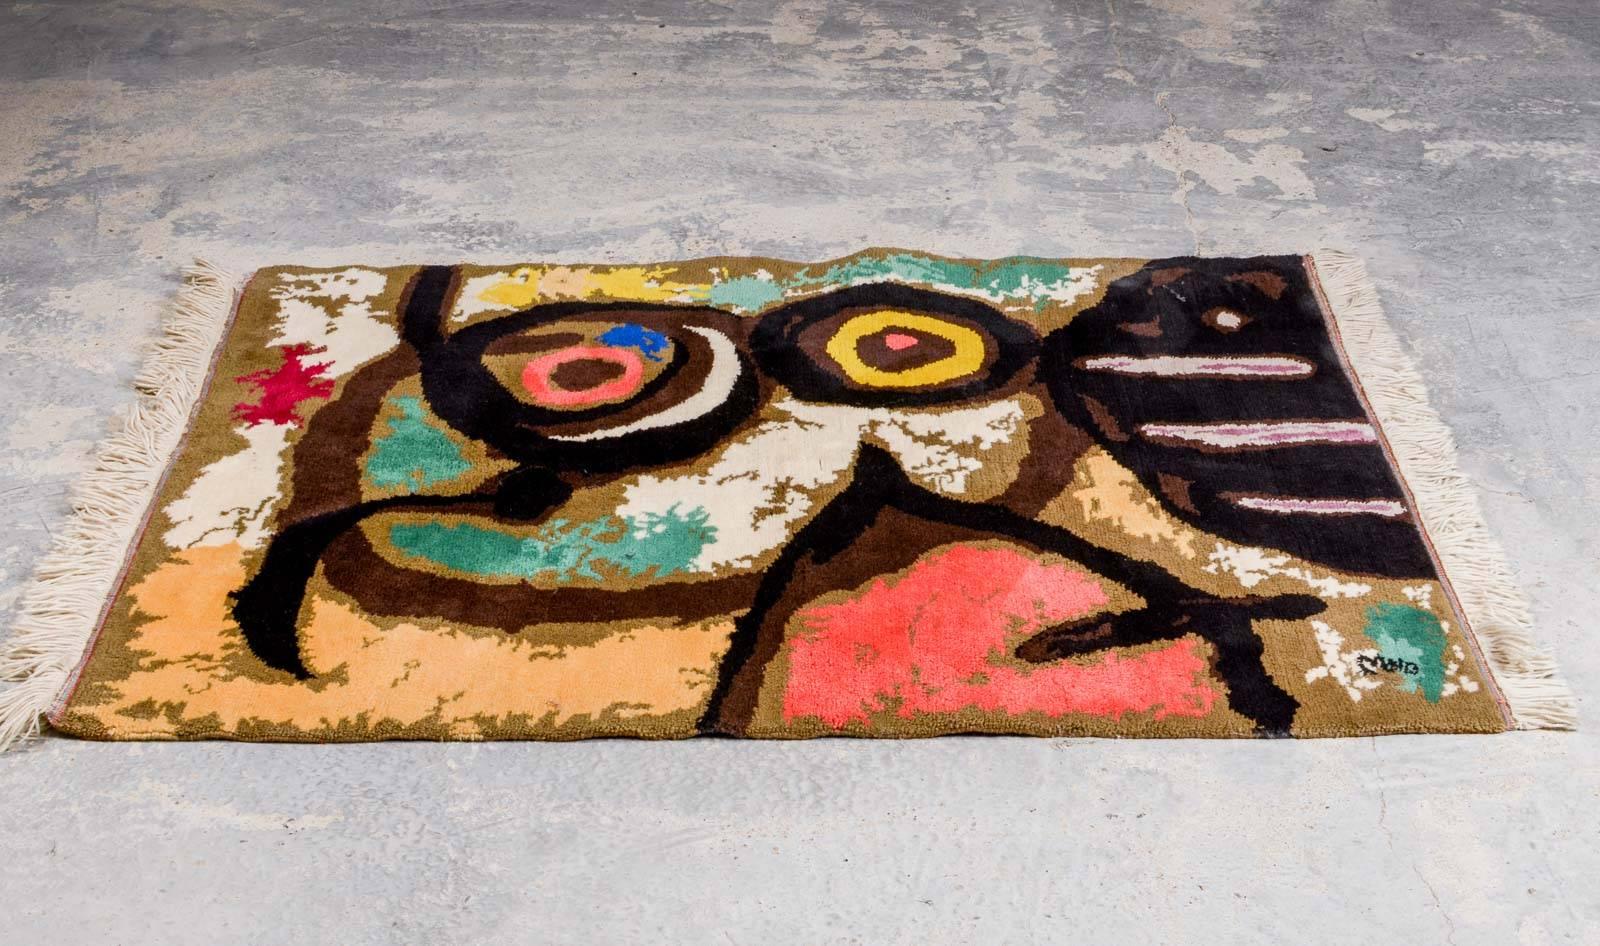 Beautiful marked tapestry of the Spanish artist/painter Joan Miró based on his painting Femme et Oiseaux (1966).
A playful, experimental approach of art is characteristic for Mirós work. Joan Miró stood literally at the base of the founding of the